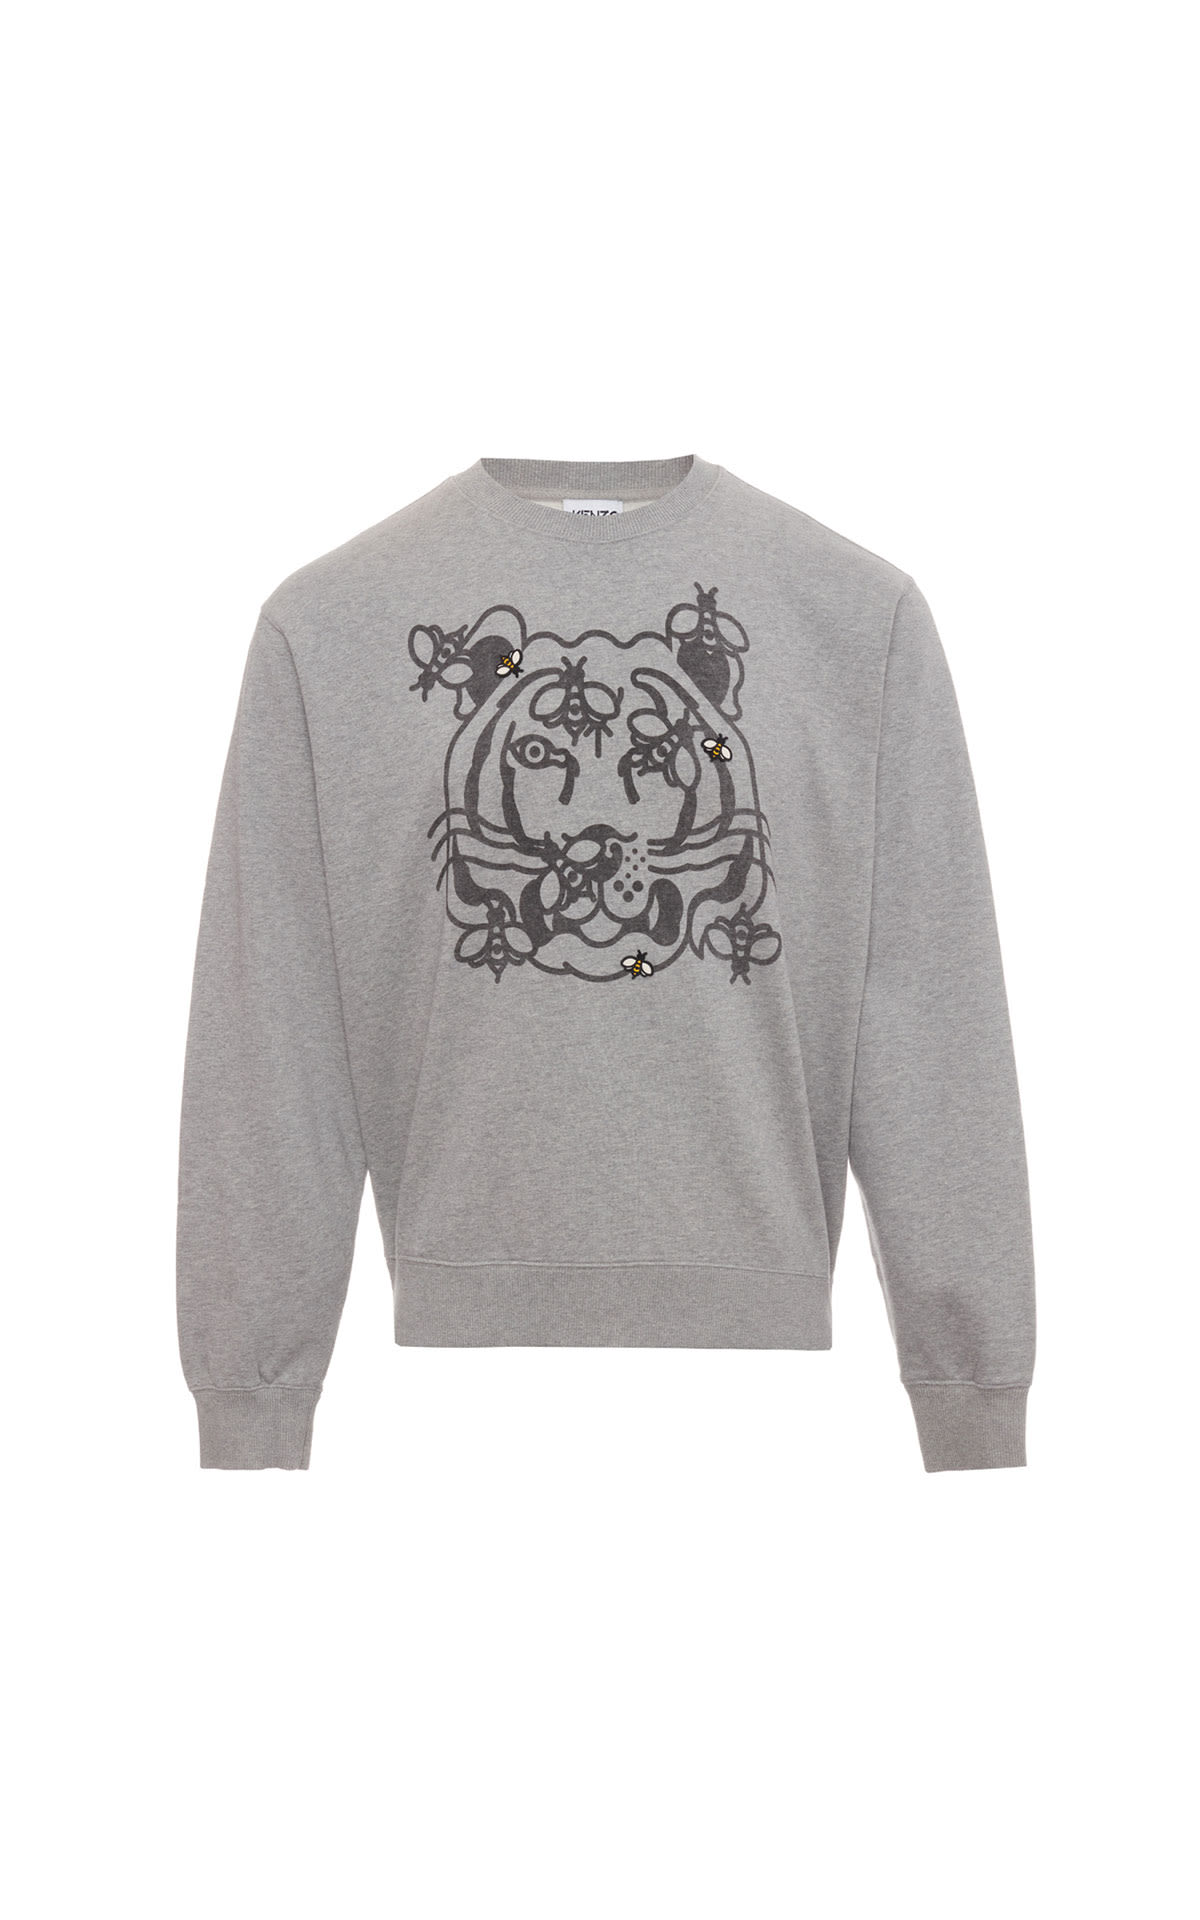 Kenzo Bee a tiger classic sweatshirt from Bicester Village